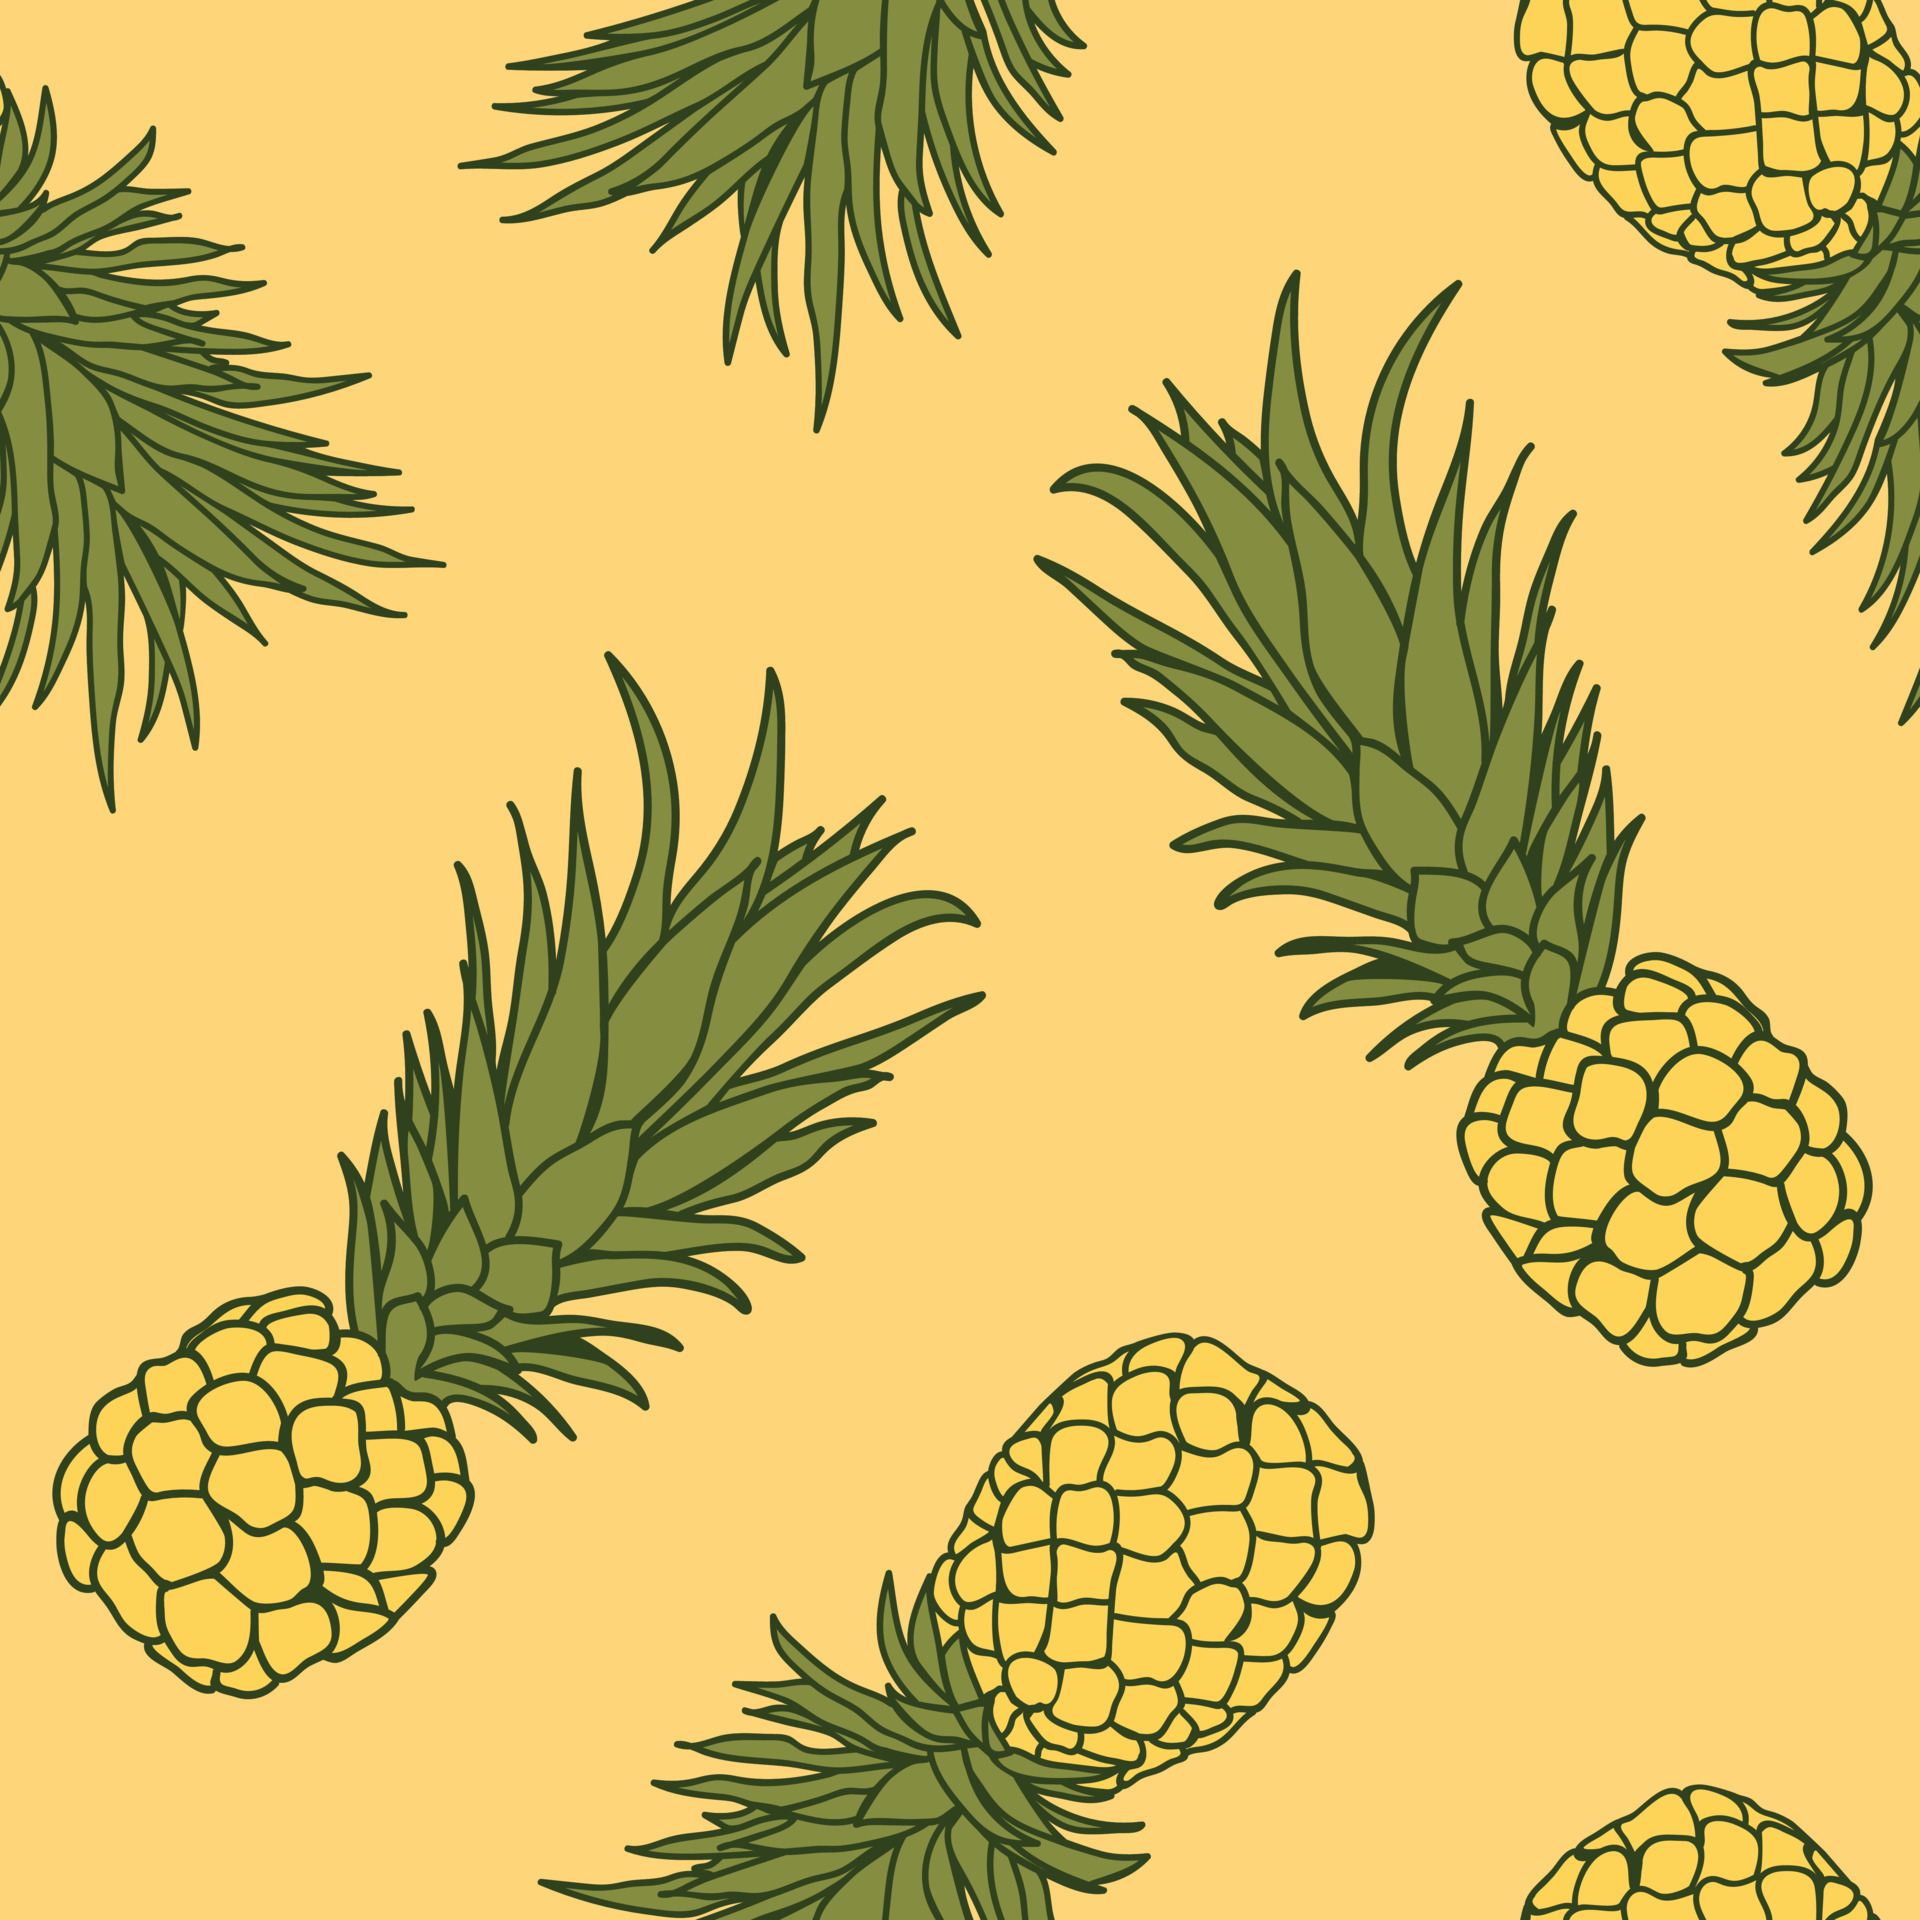 pineapple-tropical-seamless-pattern-background-tropical-nature-wrapping-paper-or-textile-desig...jpg